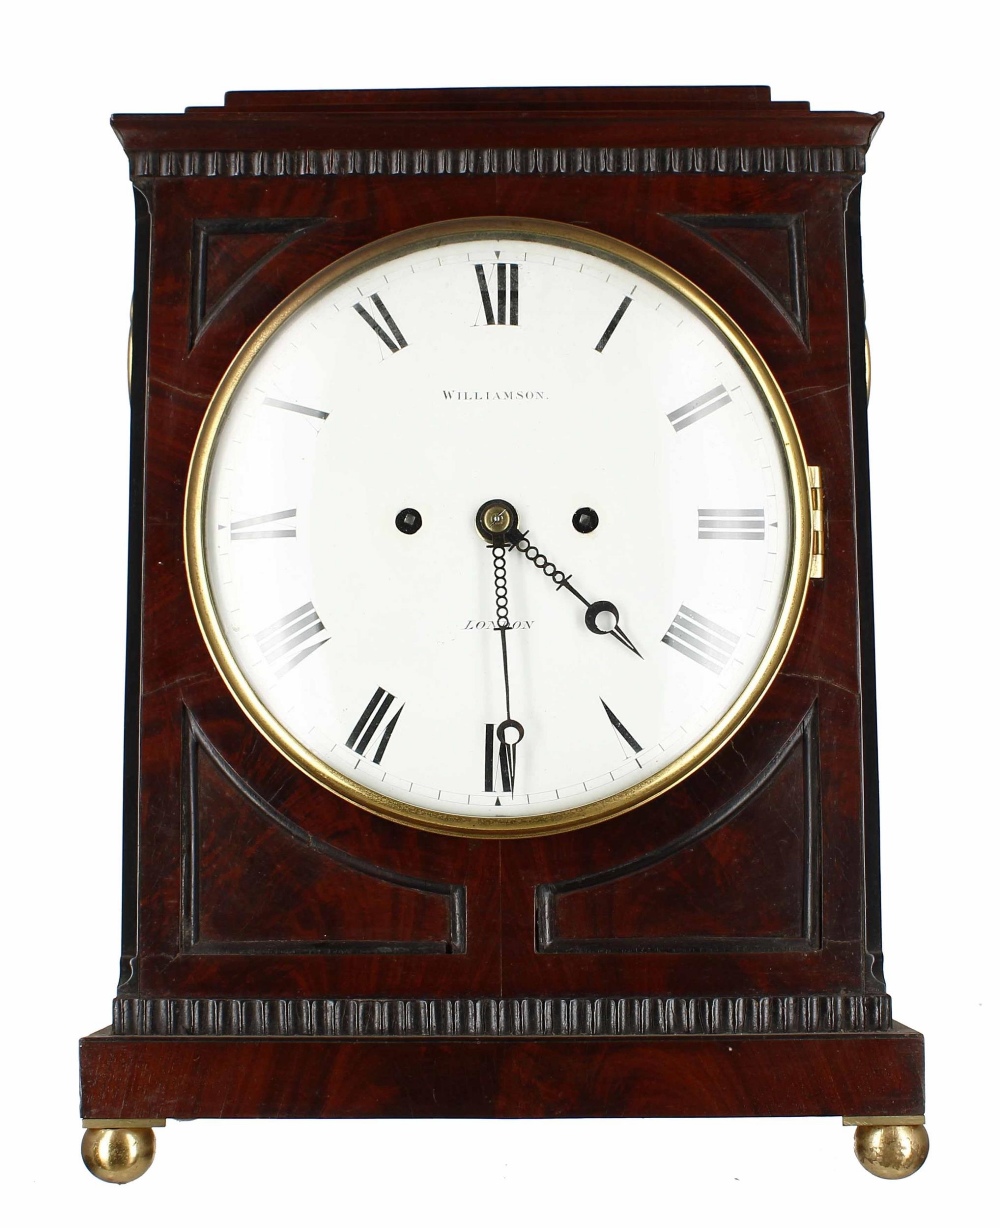 English mahogany double fusee mantel clock, the 8" white dial signed Williamson, London, also signed